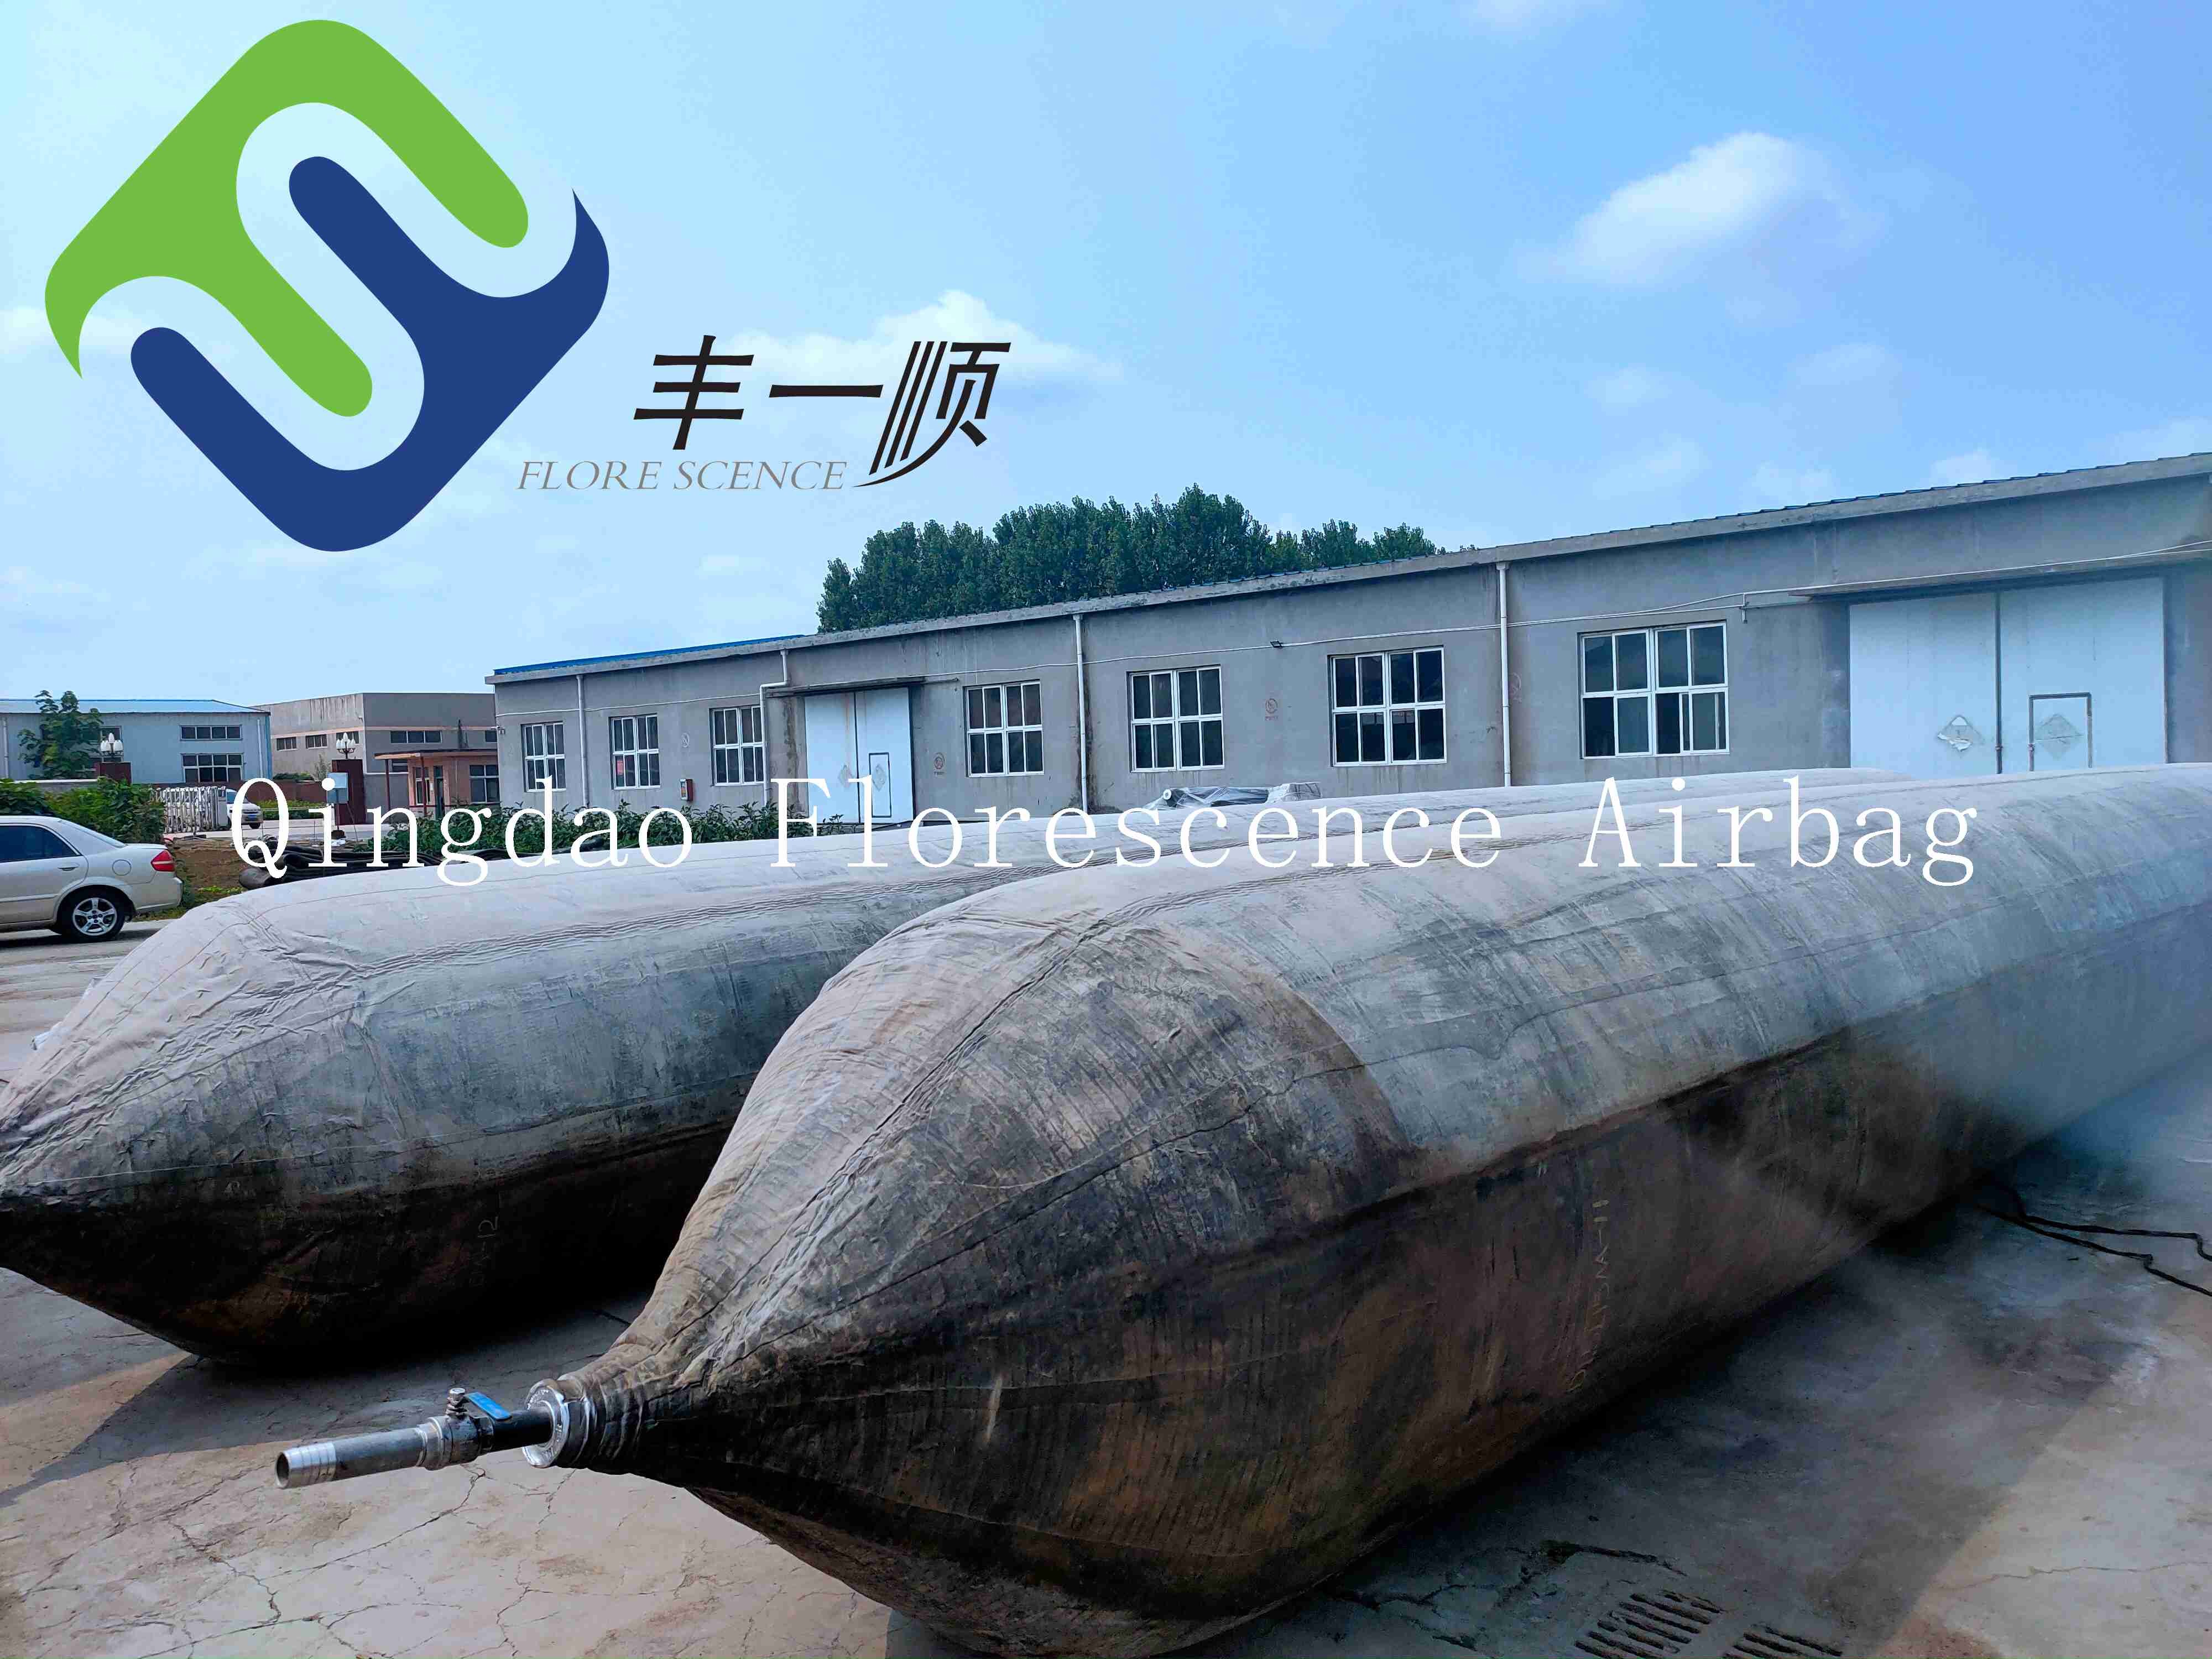 Lifting Balloon Boat Floating Marine Rubber Airbag 1.5*15m 8 Layers